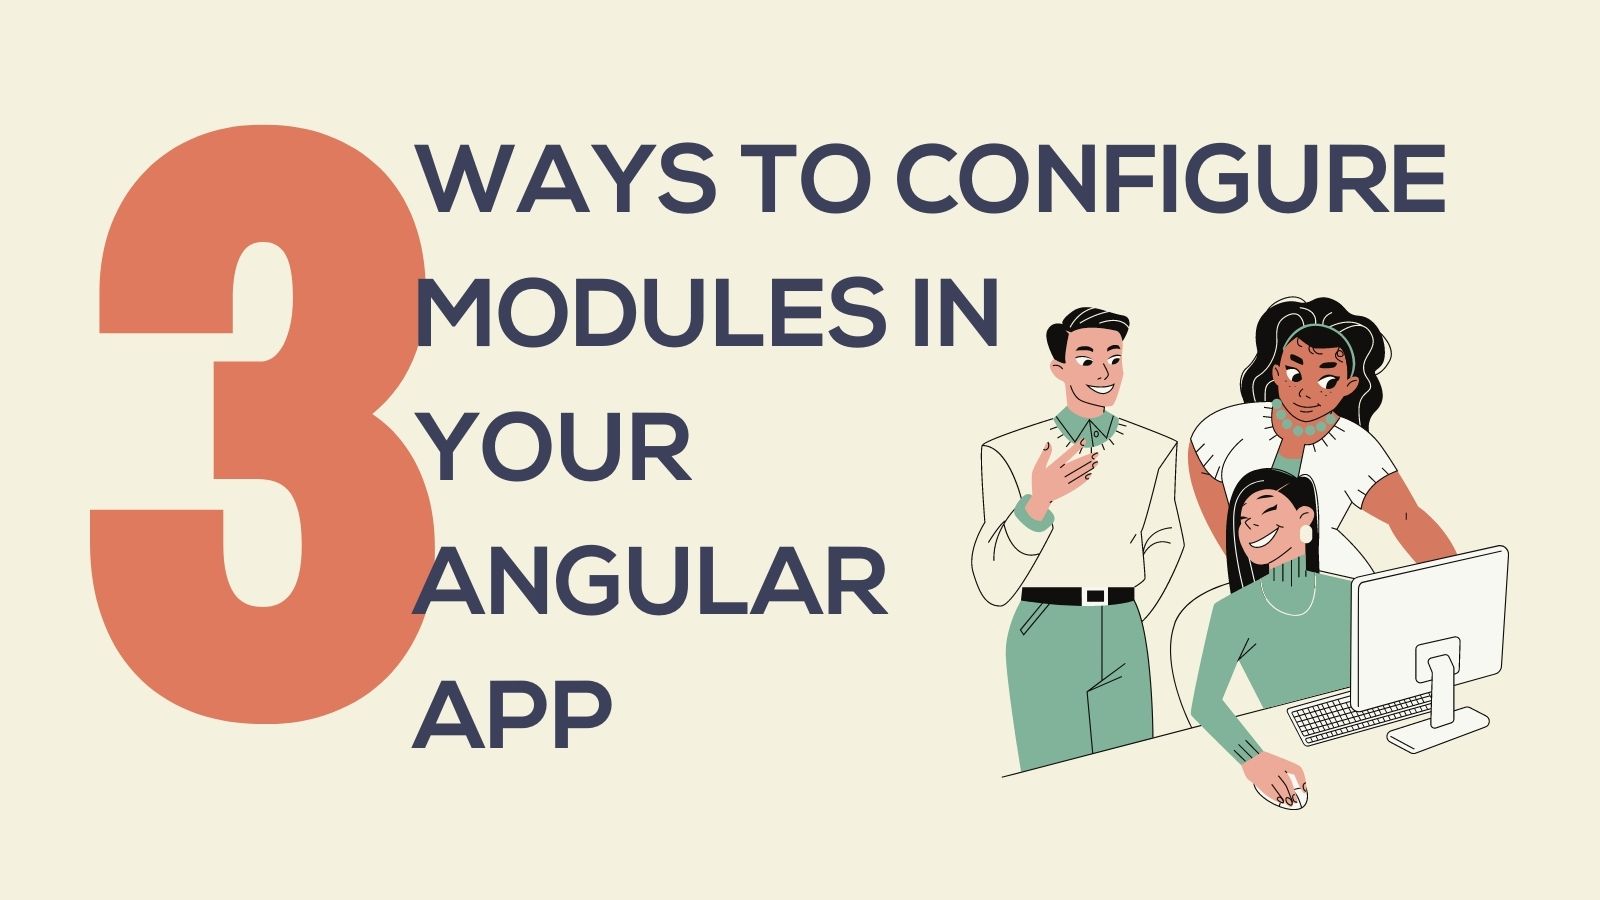 Three Ways to Configure Modules in Your Angular App